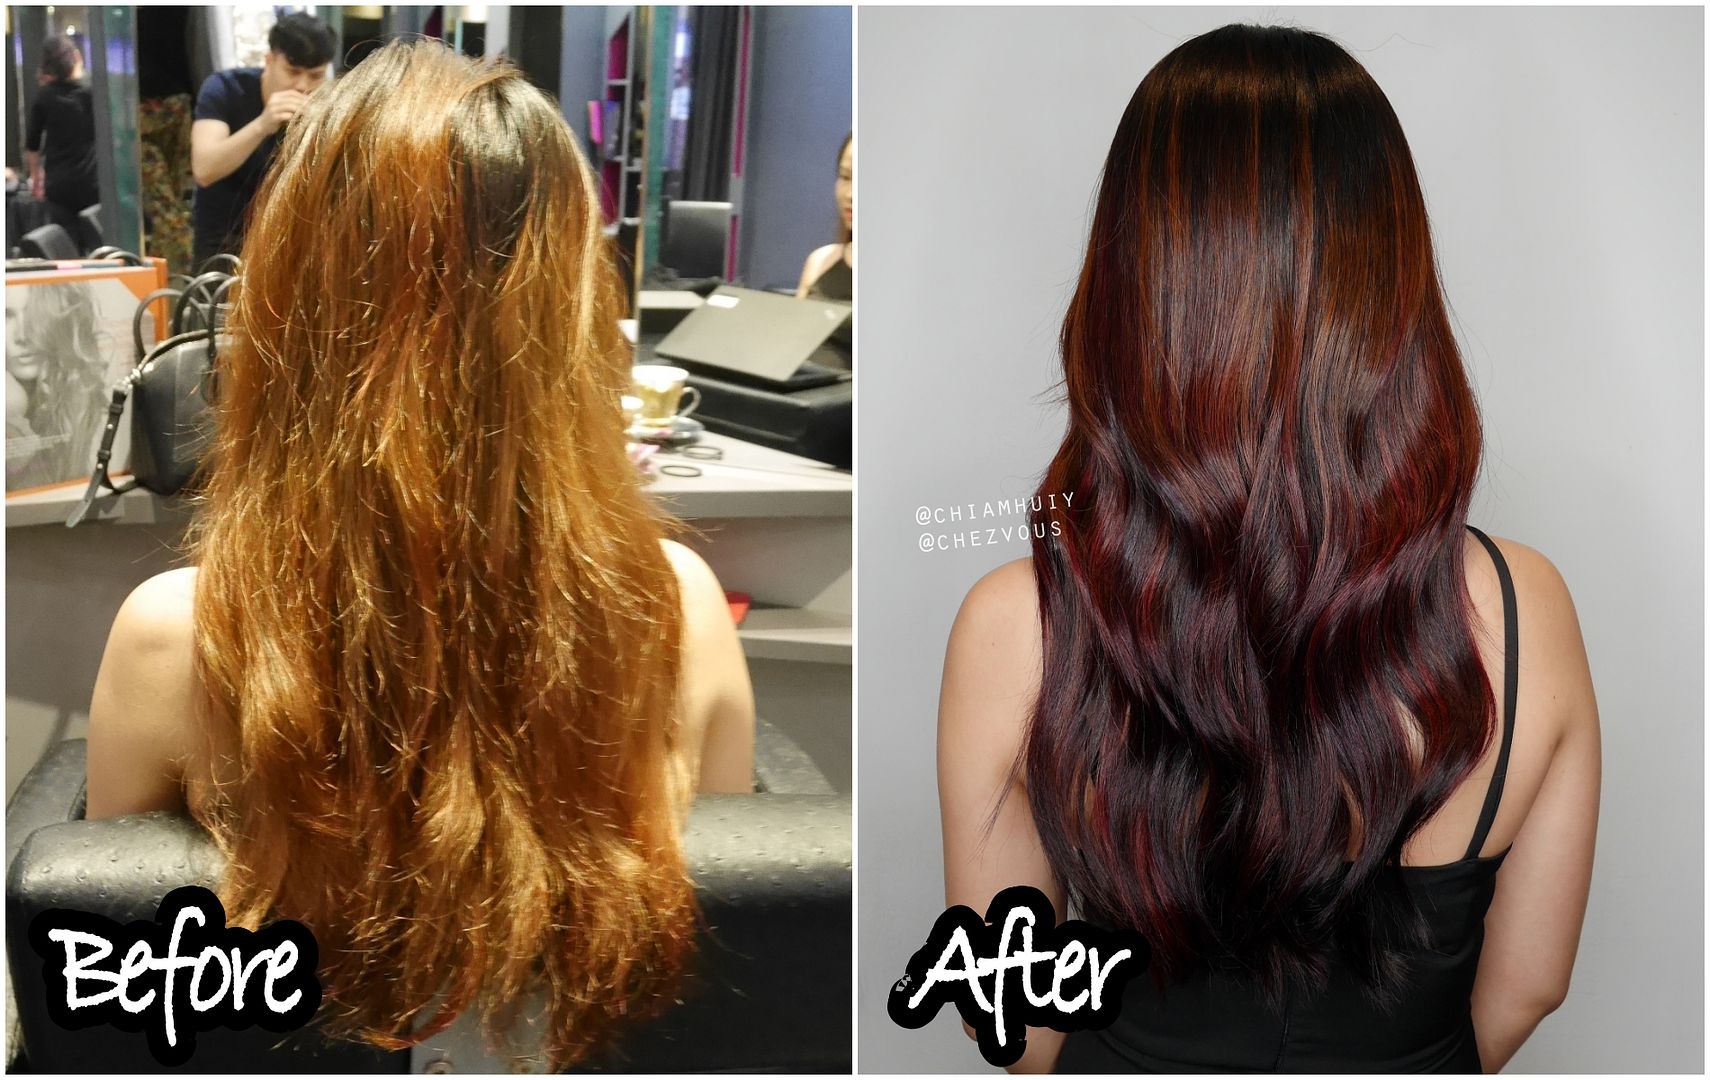  photo before and after hair treatment.jpg